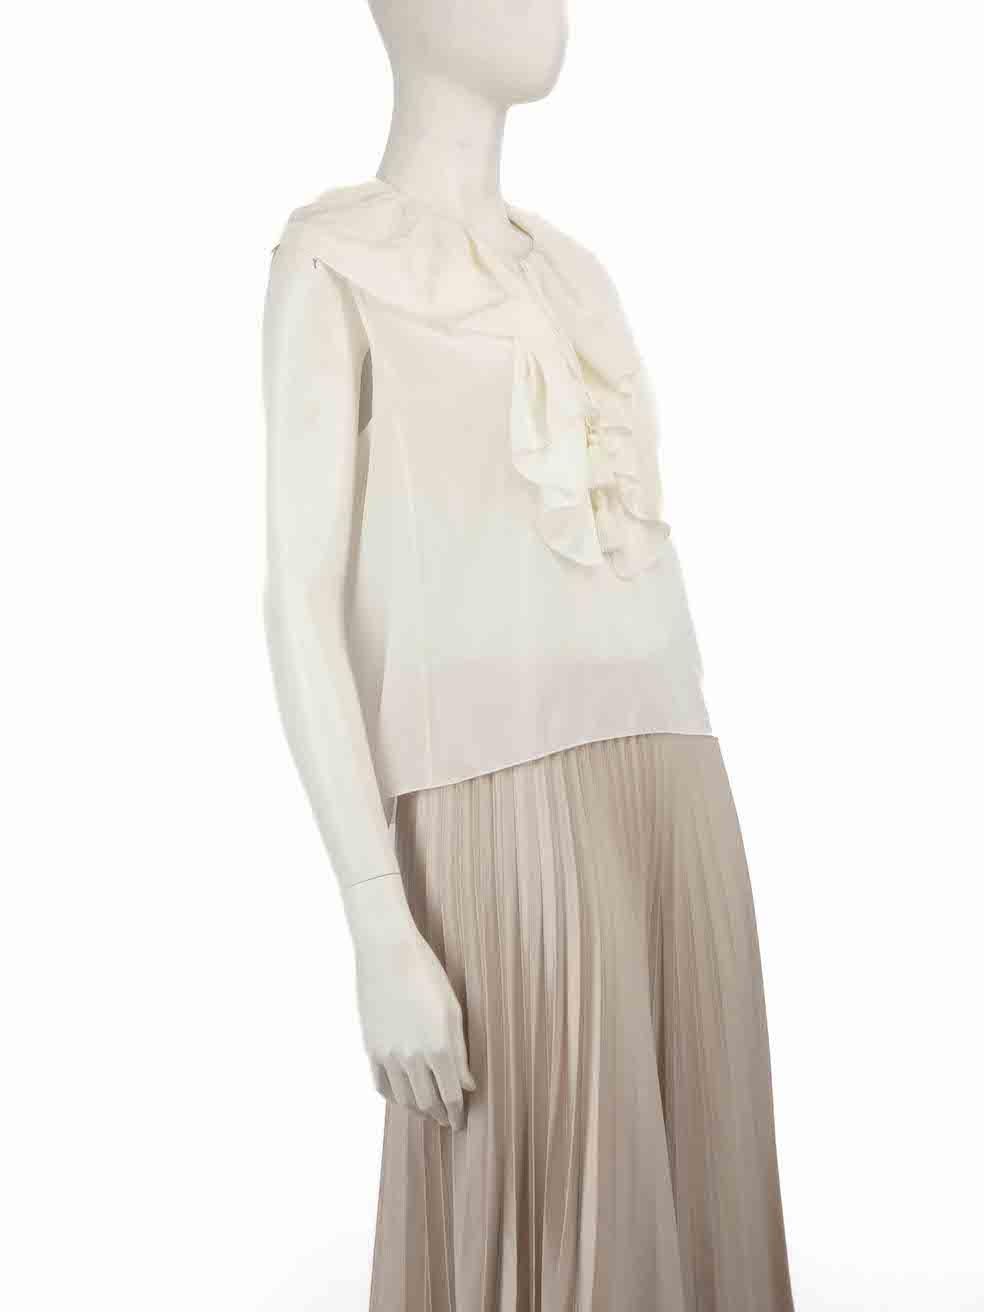 CONDITION is Very good. Hardly any visible wear to top is evident on this used Chloé designer resale item.
 
 
 
 Details
 
 
 White
 
 Silk
 
 Top
 
 Tassel detail
 
 Ruffles
 
 Sleeveless
 
 V-neck
 
 
 
 
 
 Made in Madagascar
 
 
 
 Composition
